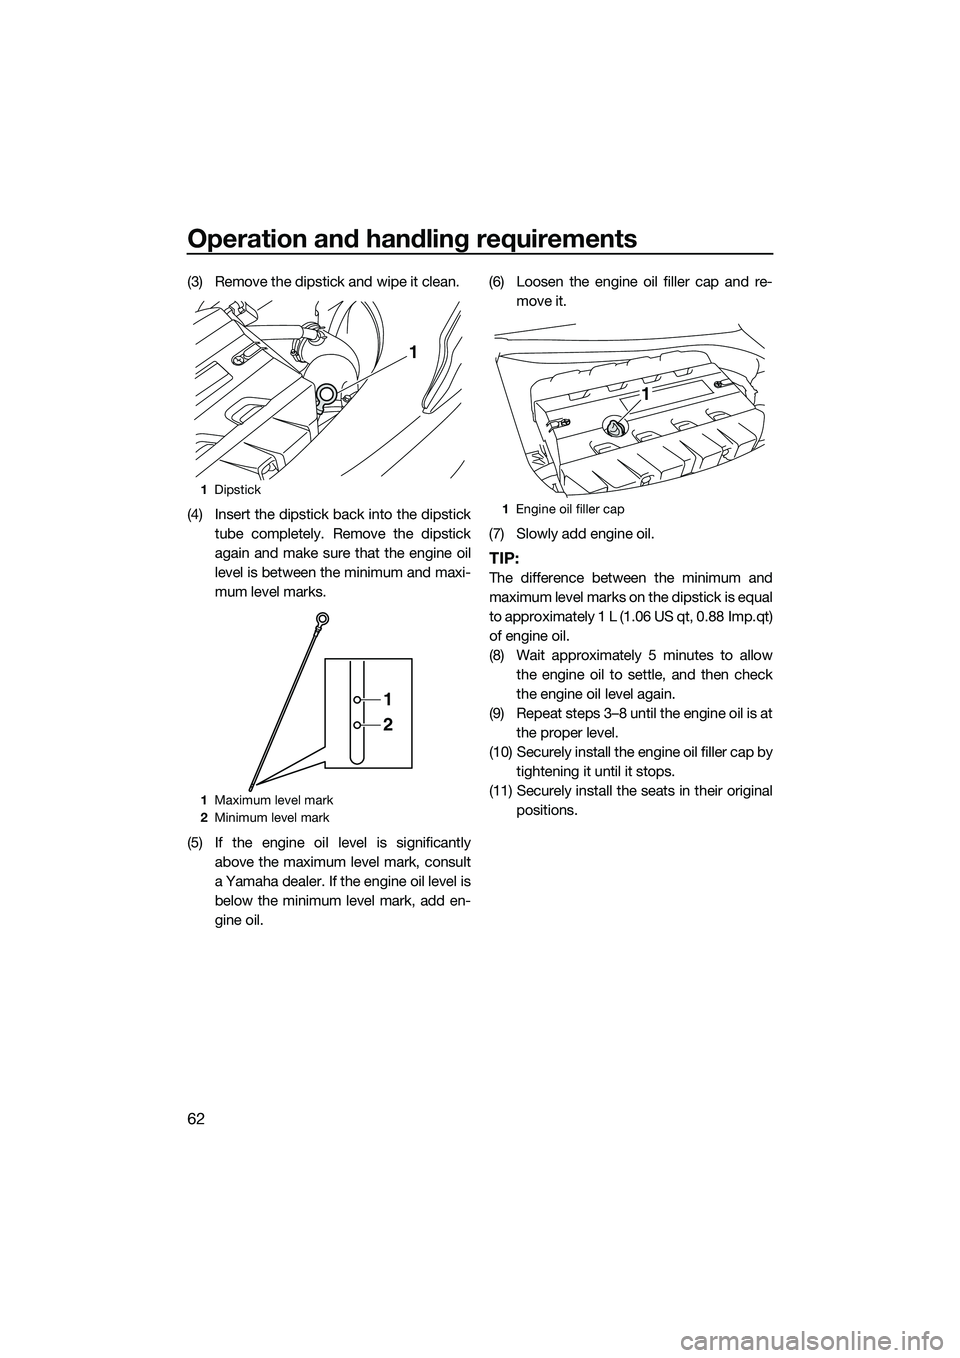 YAMAHA FX SVHO 2015  Owners Manual Operation and handling requirements
62
(3) Remove the dipstick and wipe it clean.
(4) Insert the dipstick back into the dipsticktube completely. Remove the dipstick
again and make sure that the engine